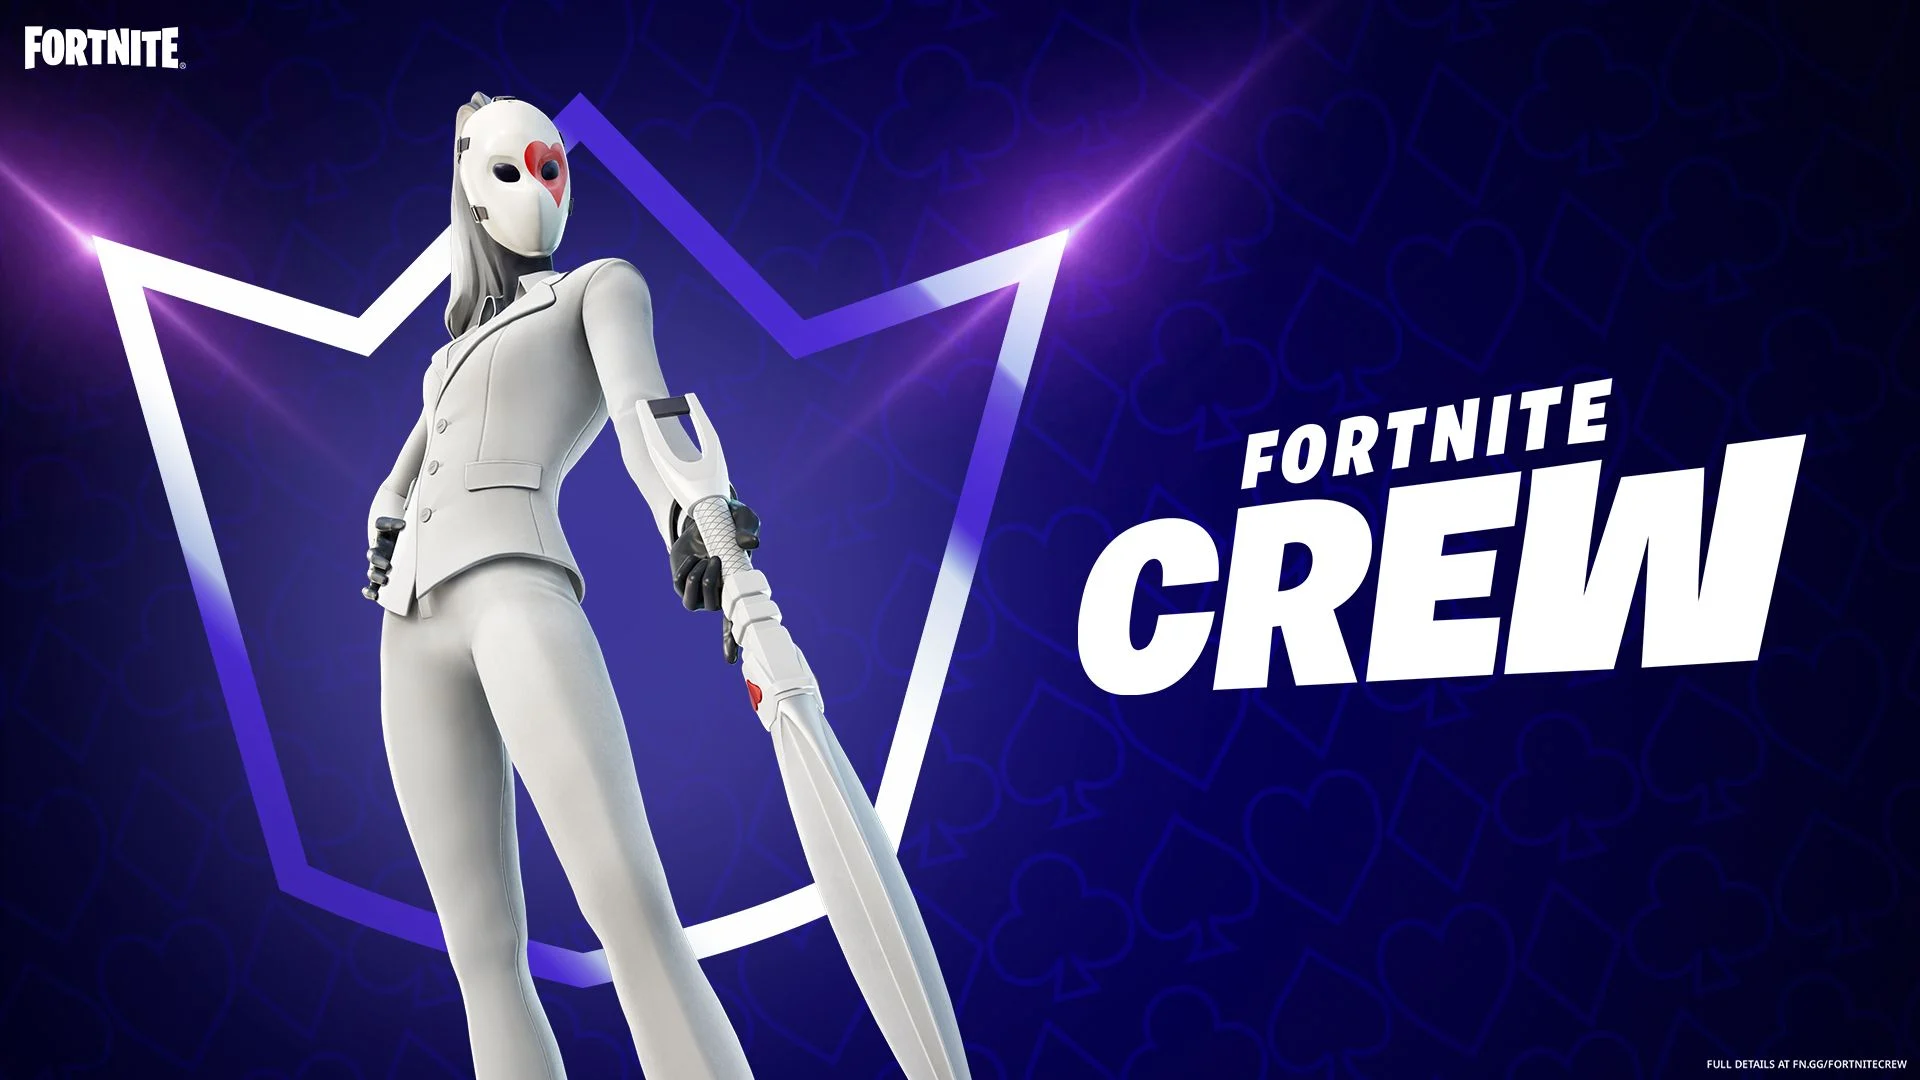 Fortnite Crew Pack's September gifts have been announced!